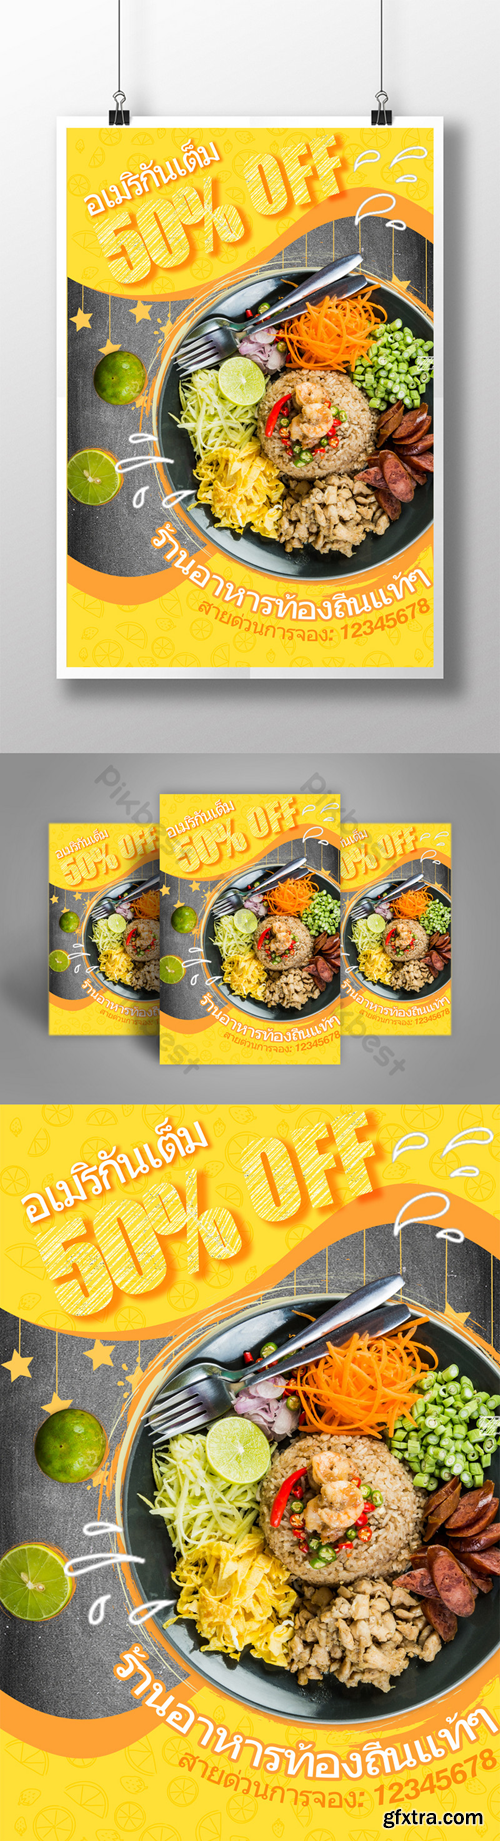 Colourful Thai Food Poster Template PSD